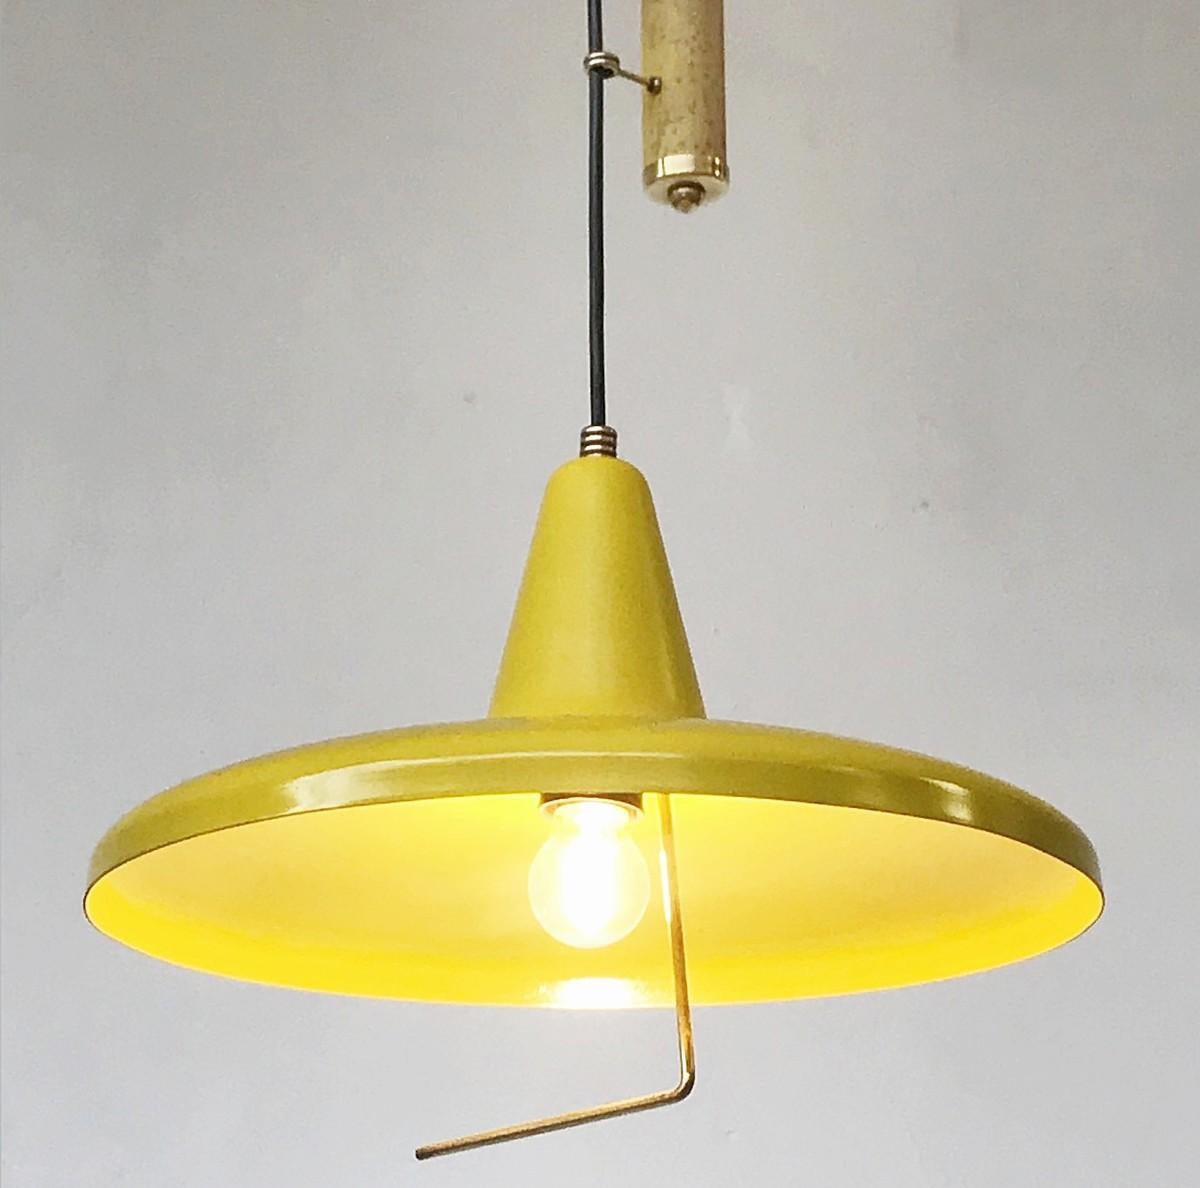 European Height Adjustable Pendant Lamp with Counter Weight